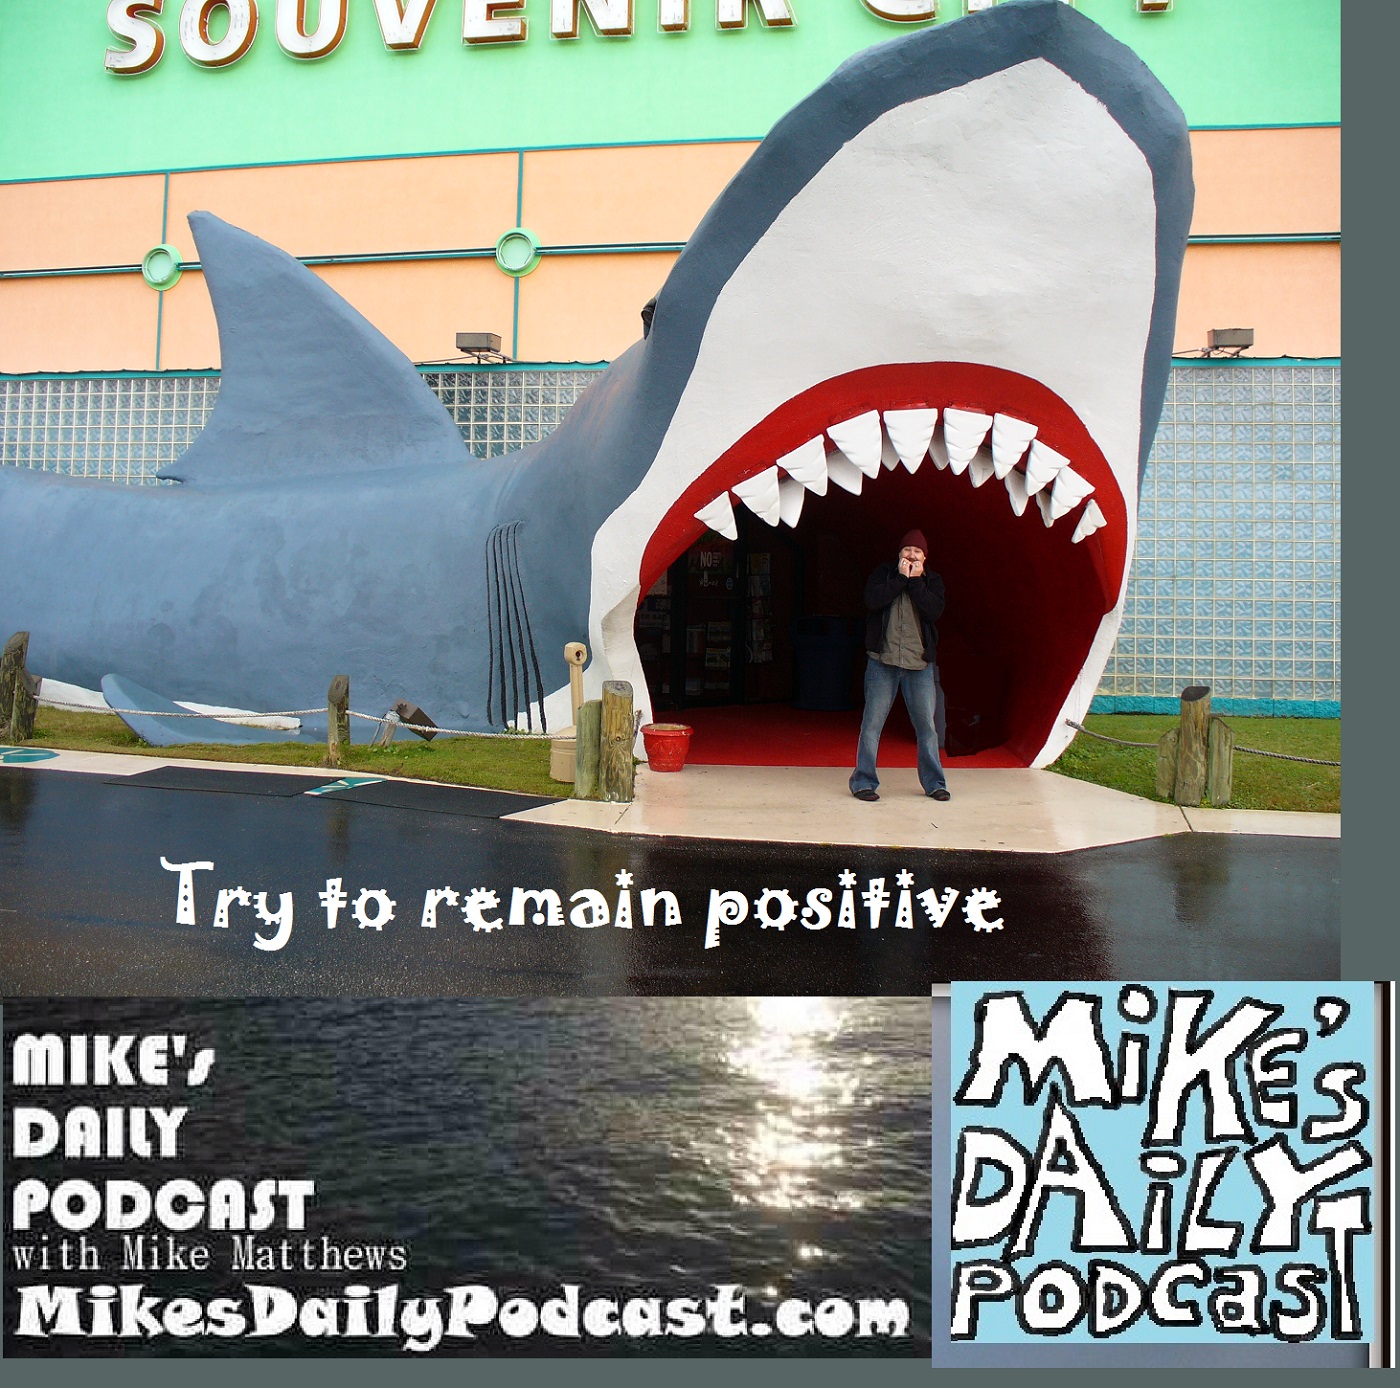 mikes-daily-podcast-1216-gulf-shores-alabama